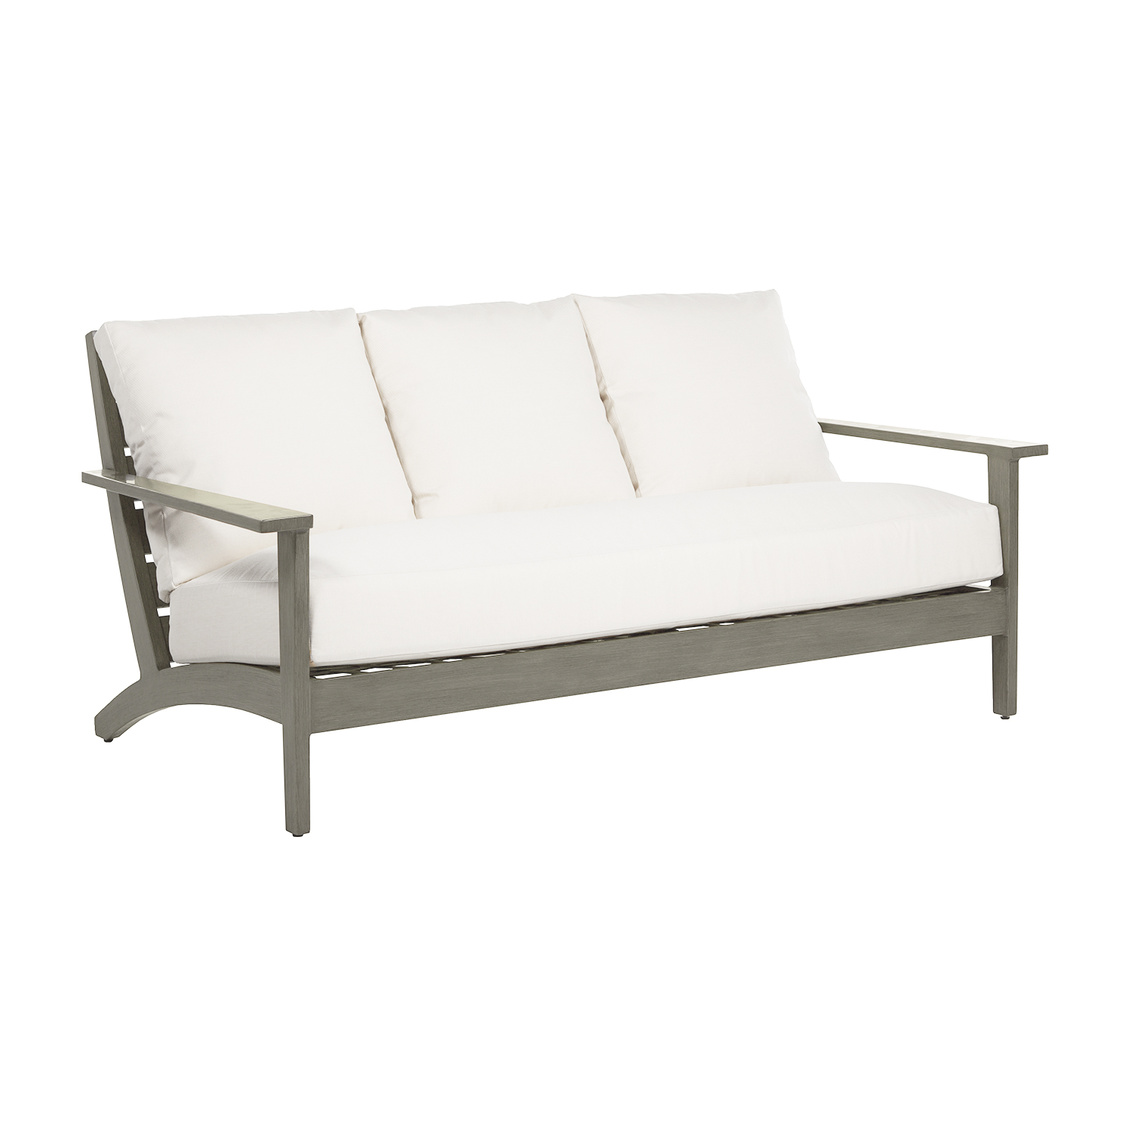 kennebunkport sofa in oyster – frame only product image